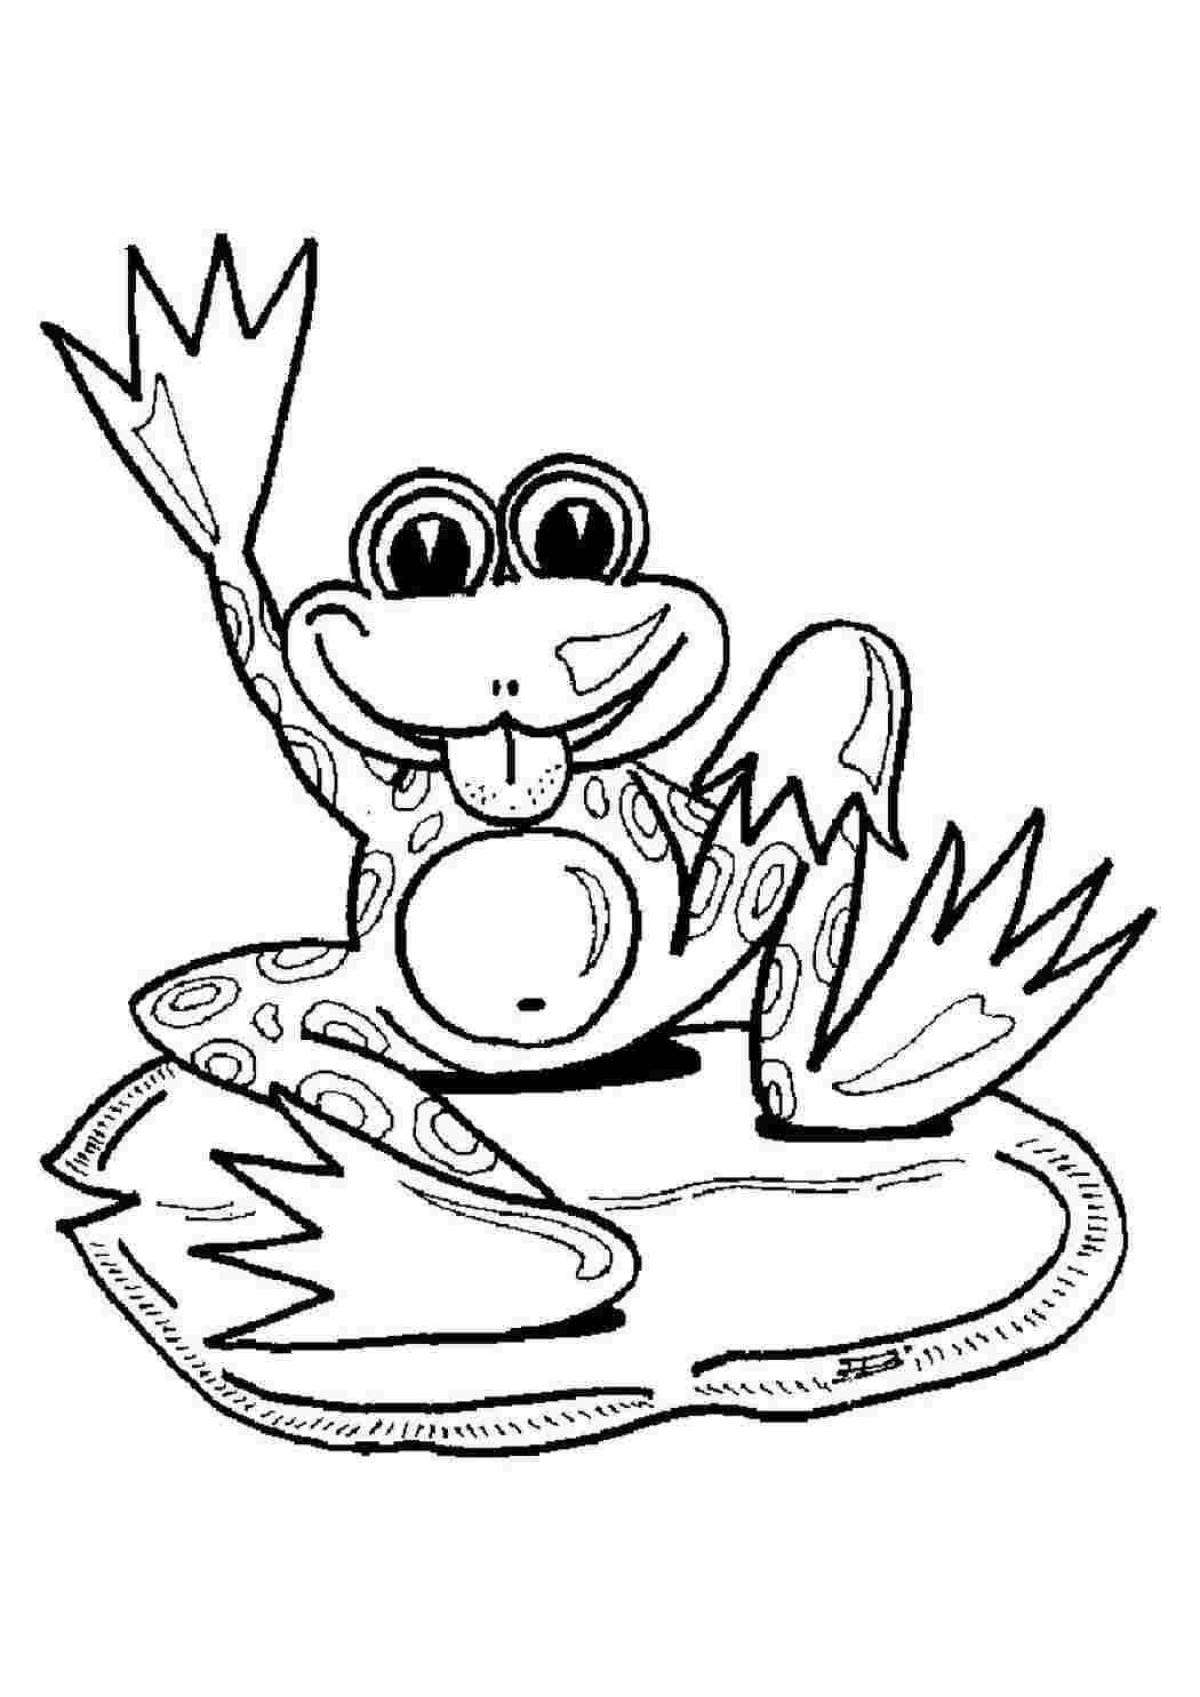 Frog Animated Drawing Coloring Page